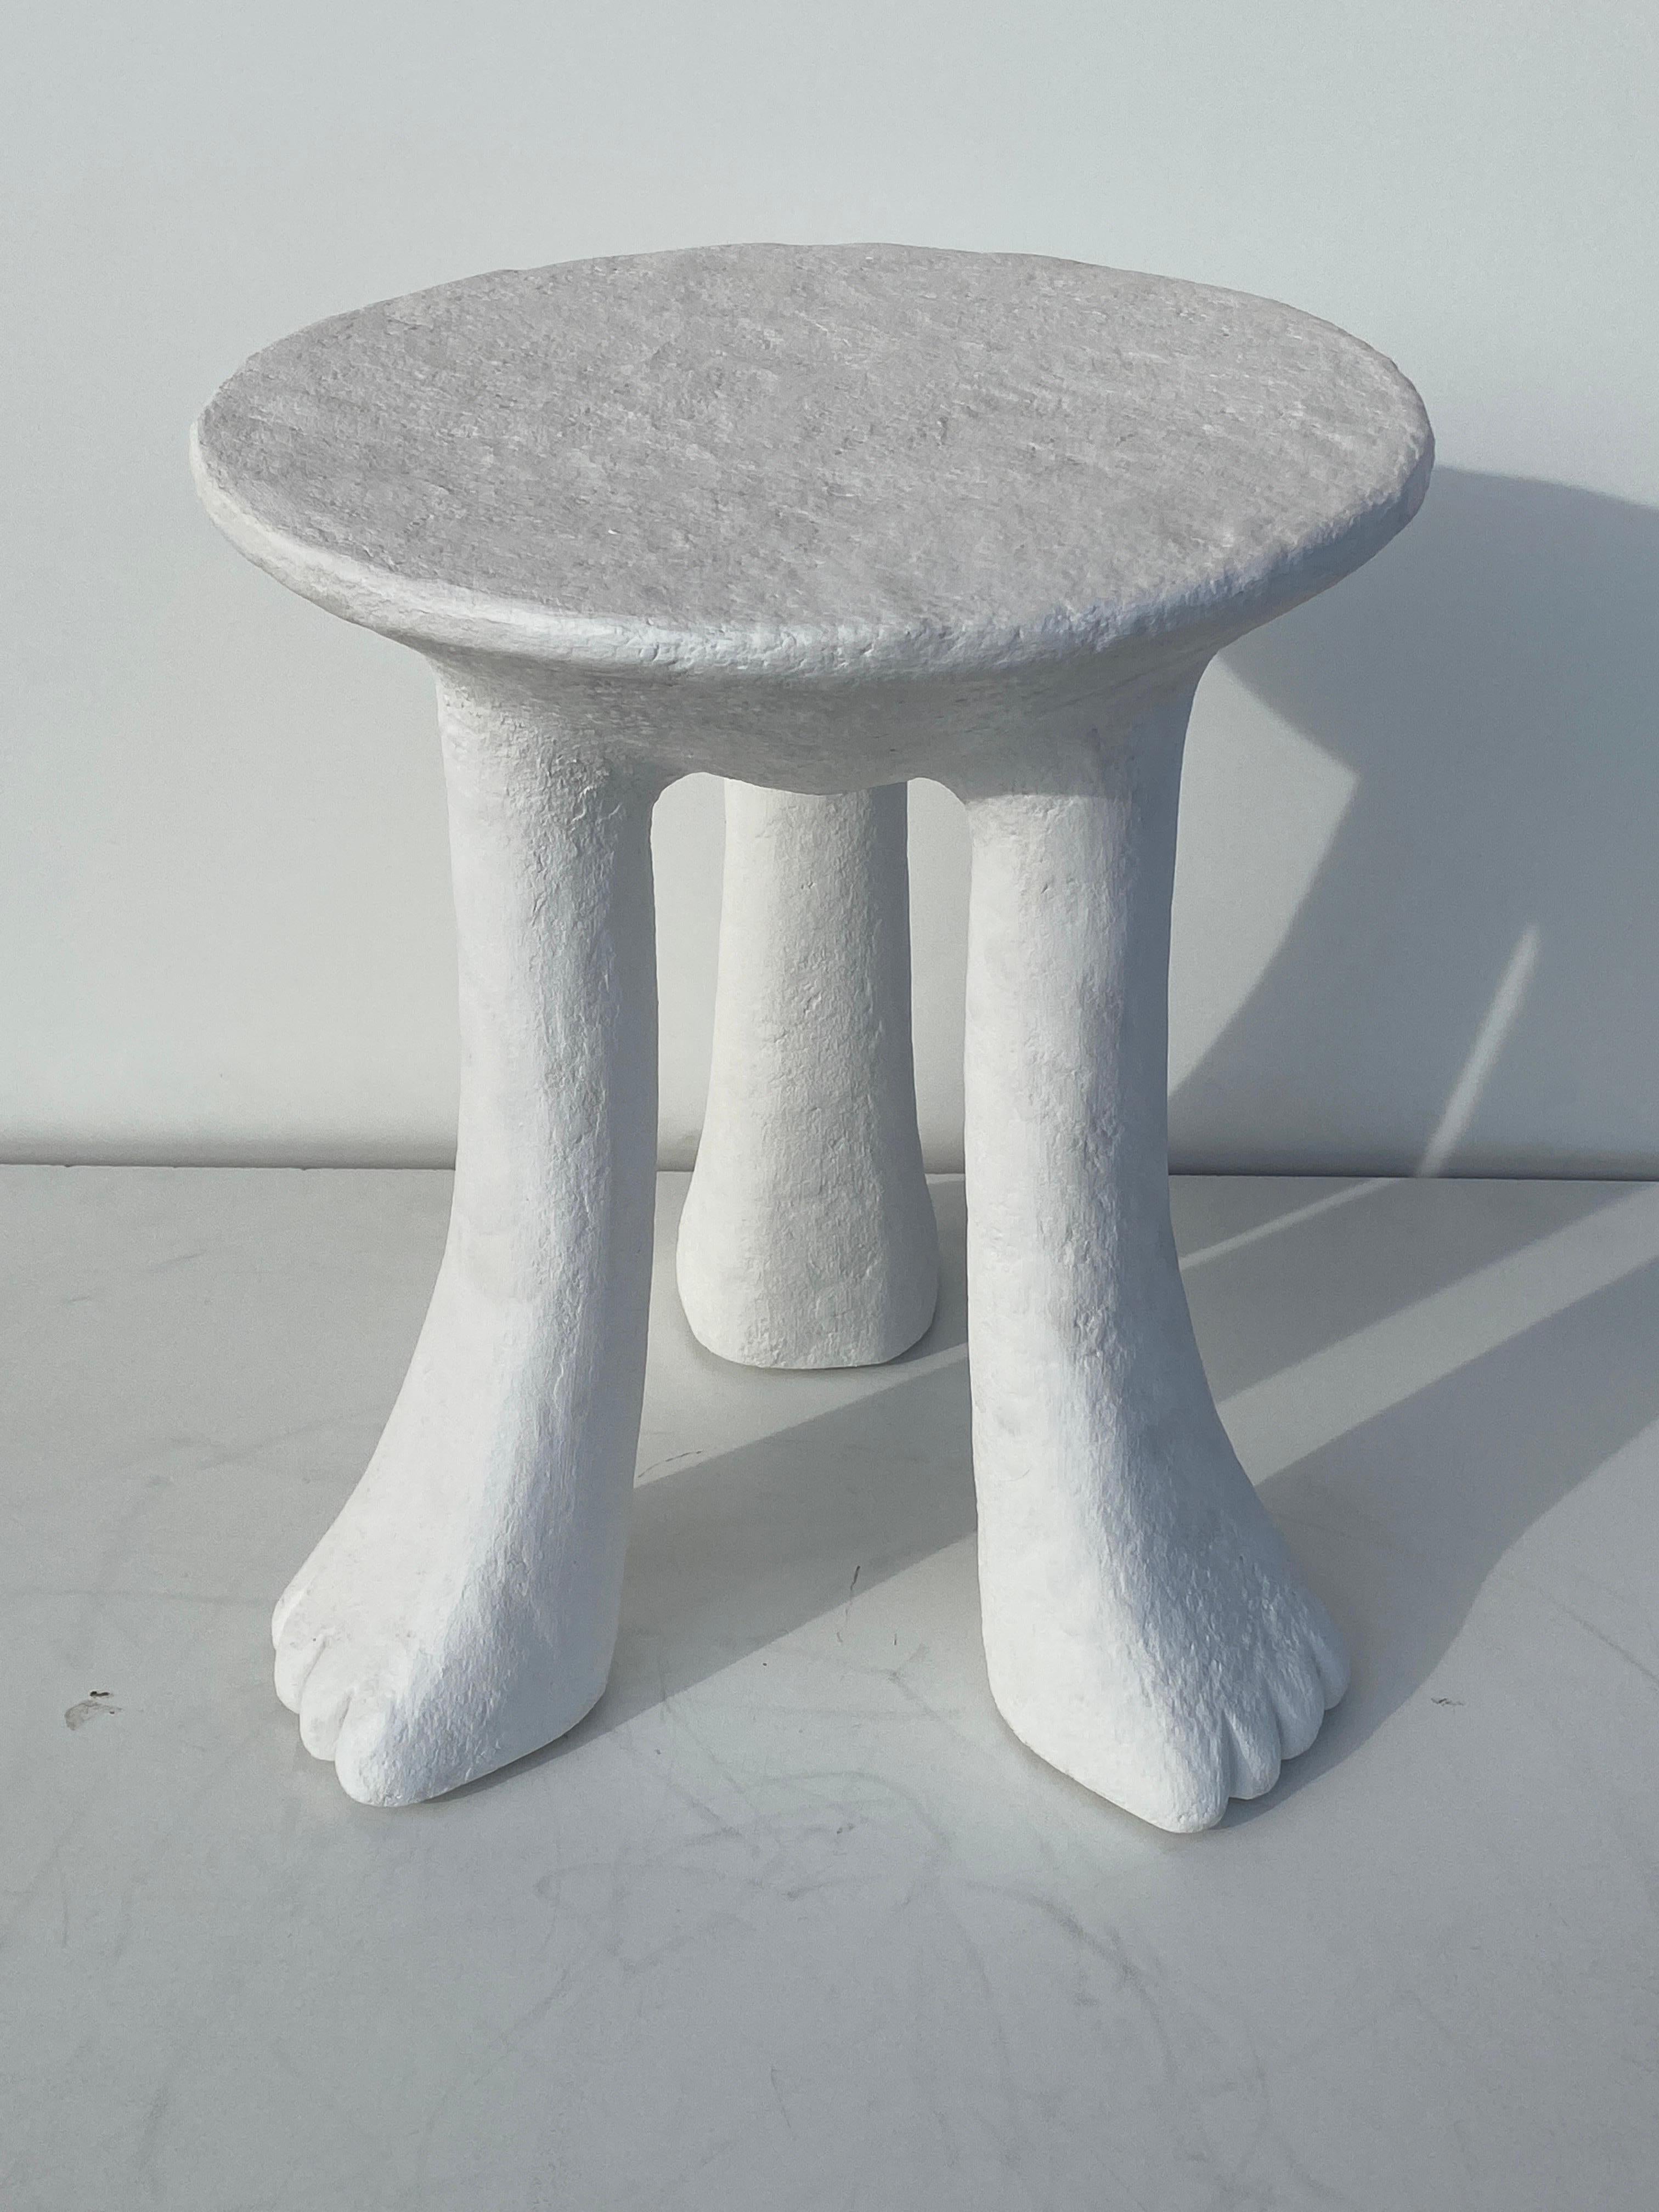 Primitive “African” side / end table in the style of John Dickinson made of wood and covered in plaster.